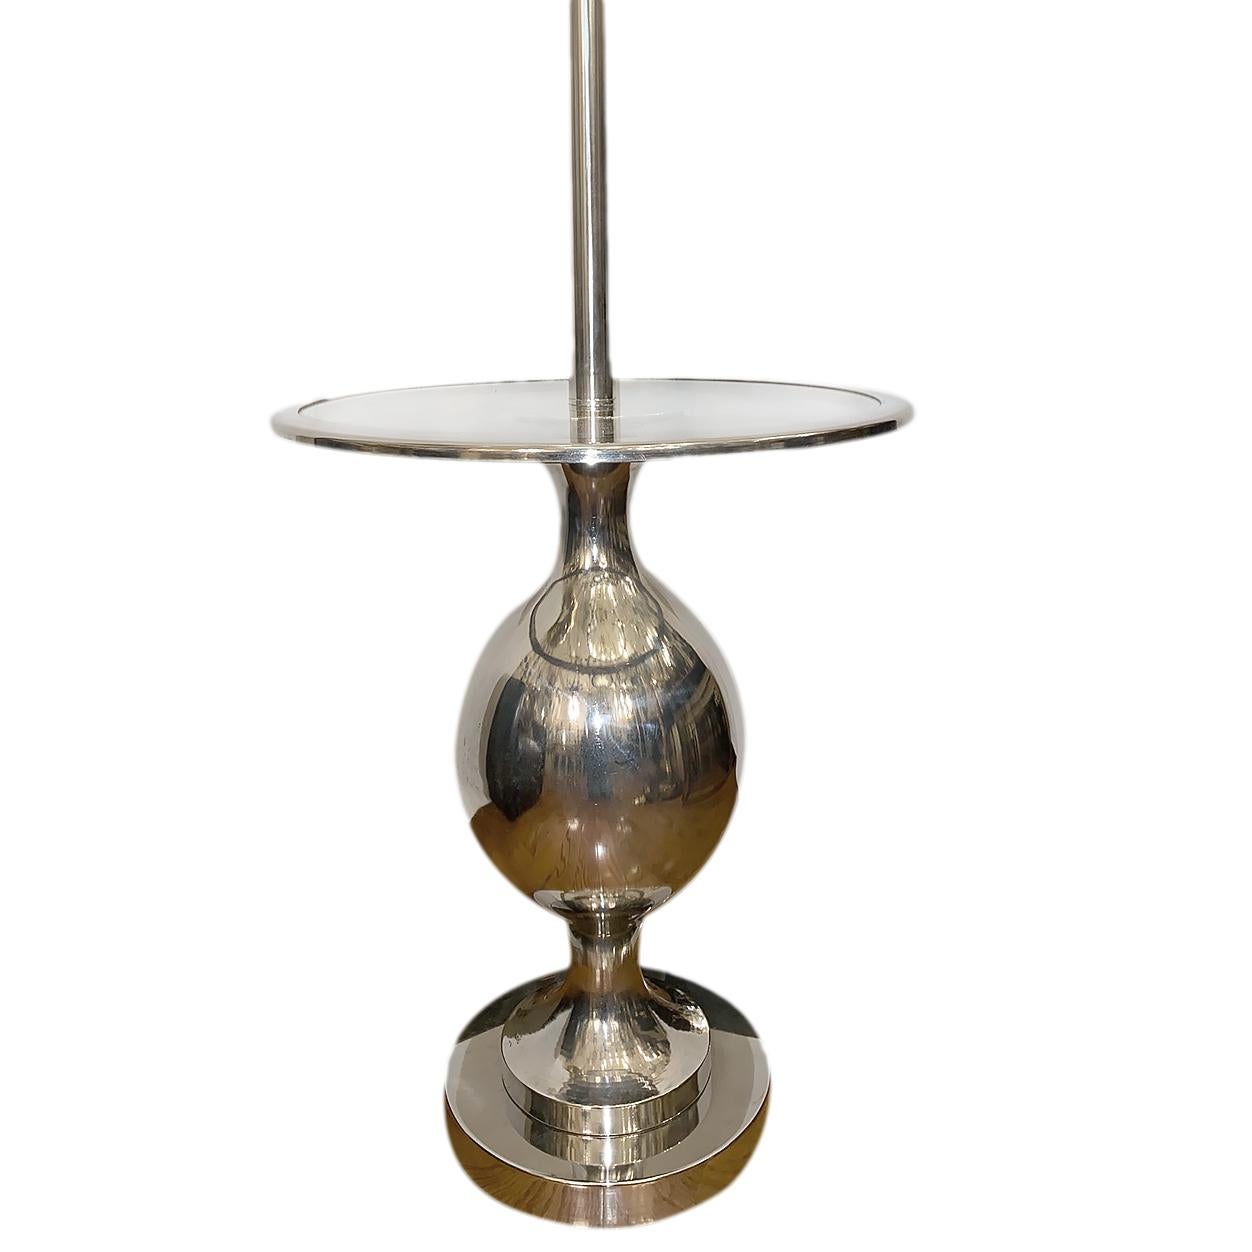 Late 20th Century French Moderne Silver Plated Table Floor Lamp